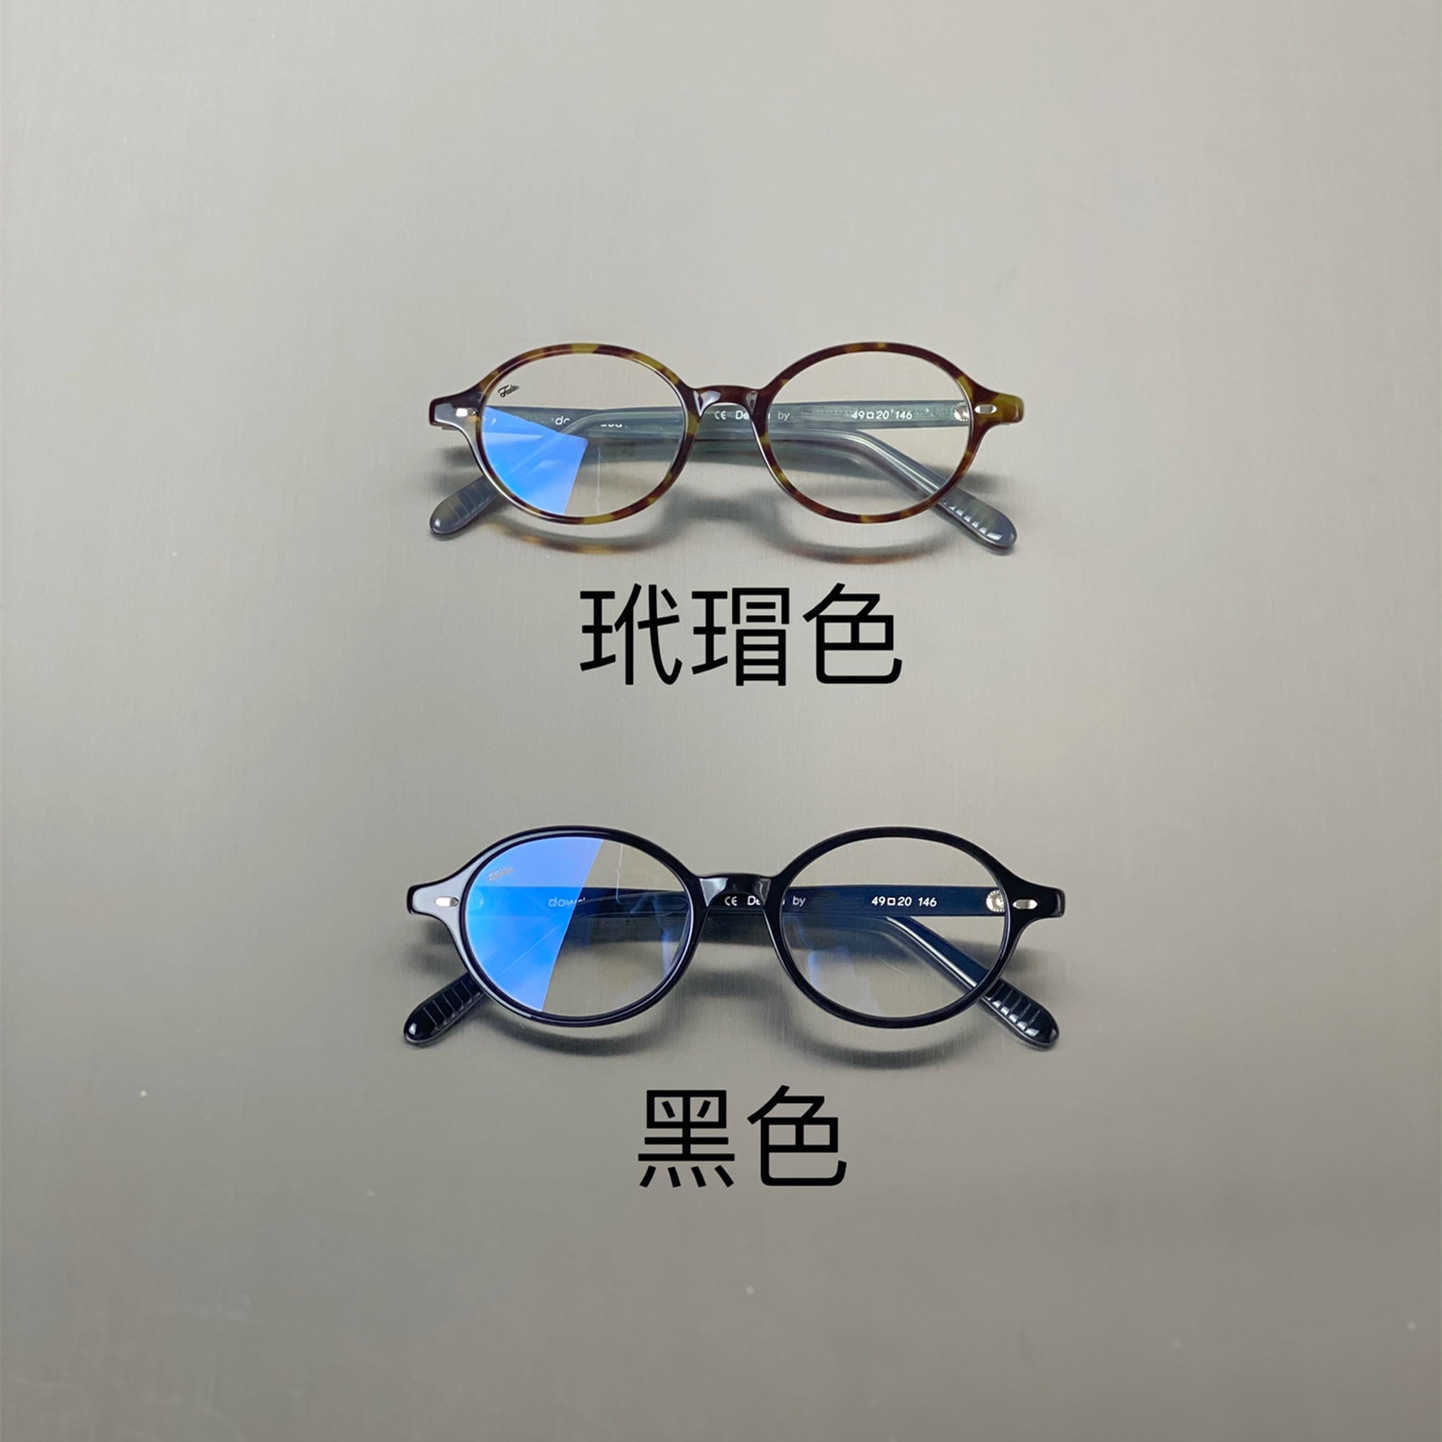 Fakes new hawksbill color oval eyeglass frame dowdy anti blue light ghostly girl feeling can be matched with different degrees